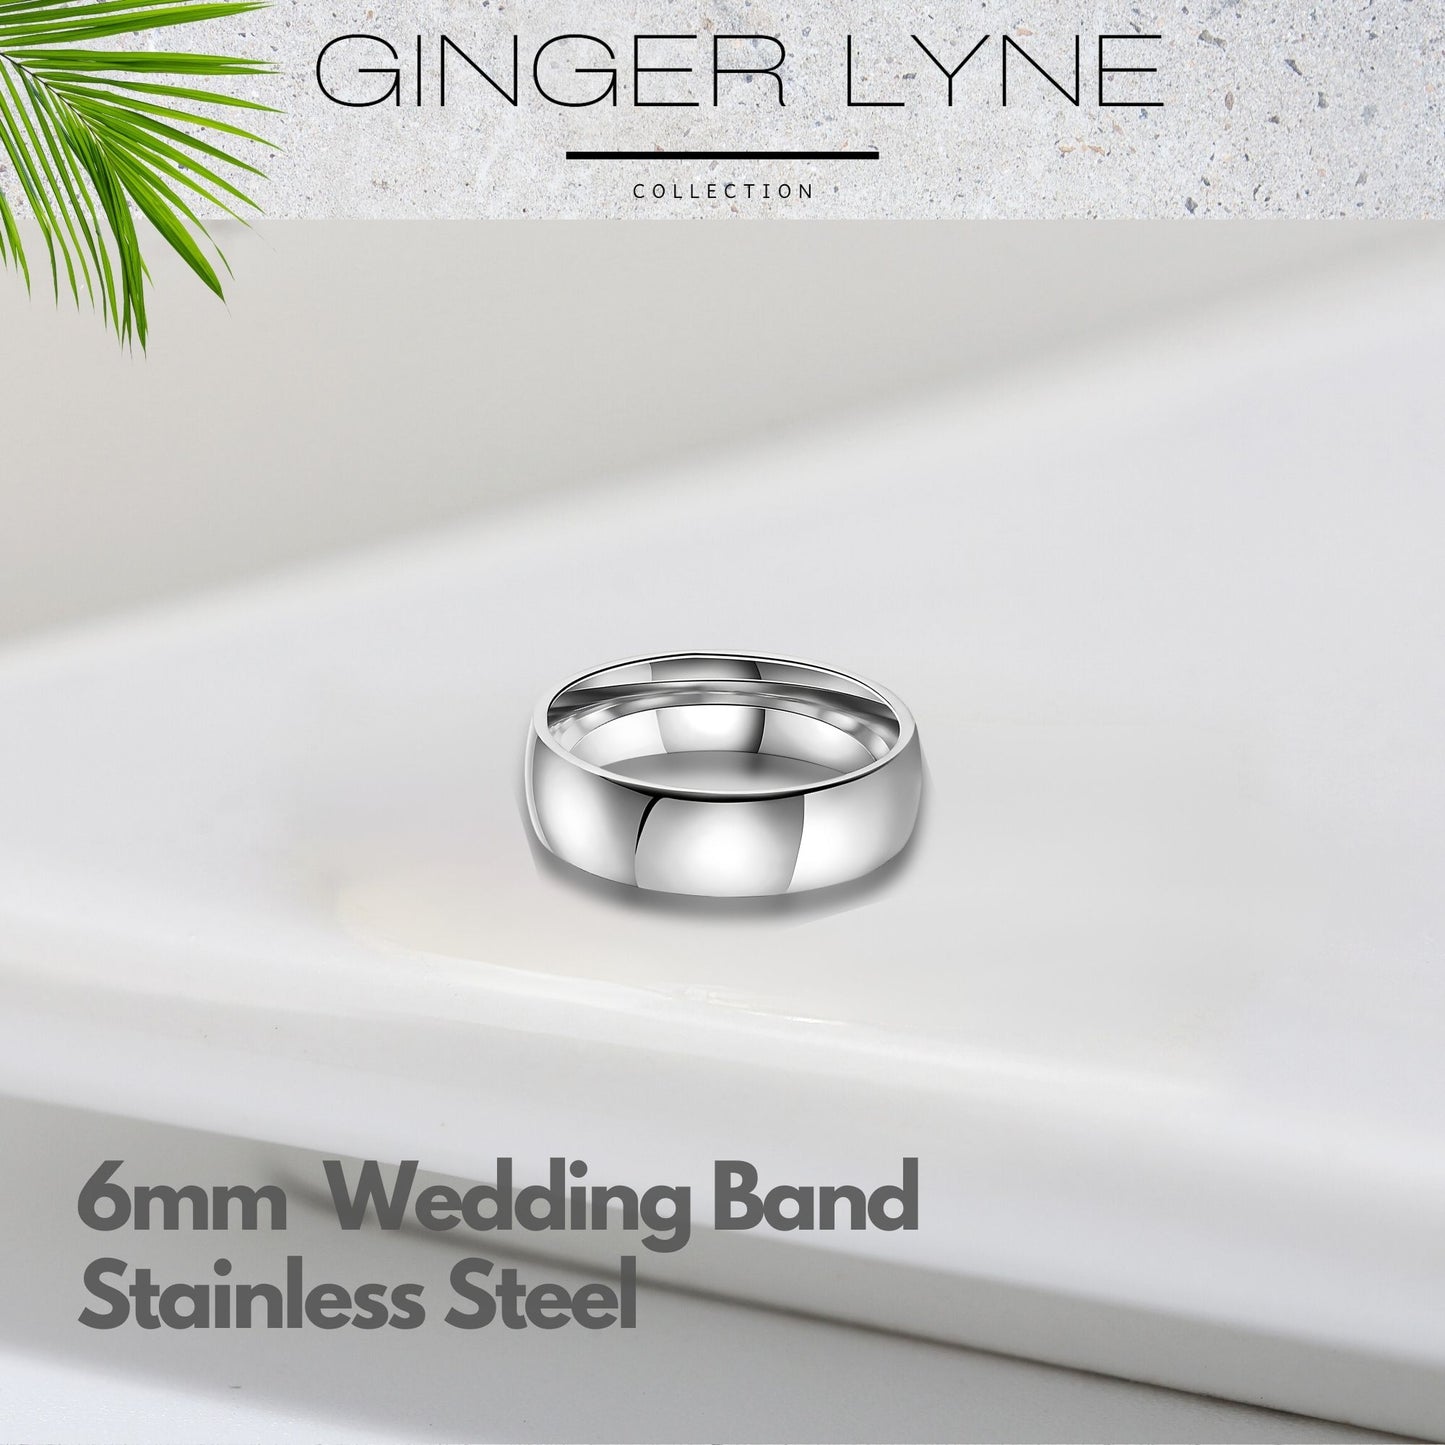 6mm Stainless Steel Wedding Band Ring Women Men Ginger Lyne Collection - 6mm Silver,8